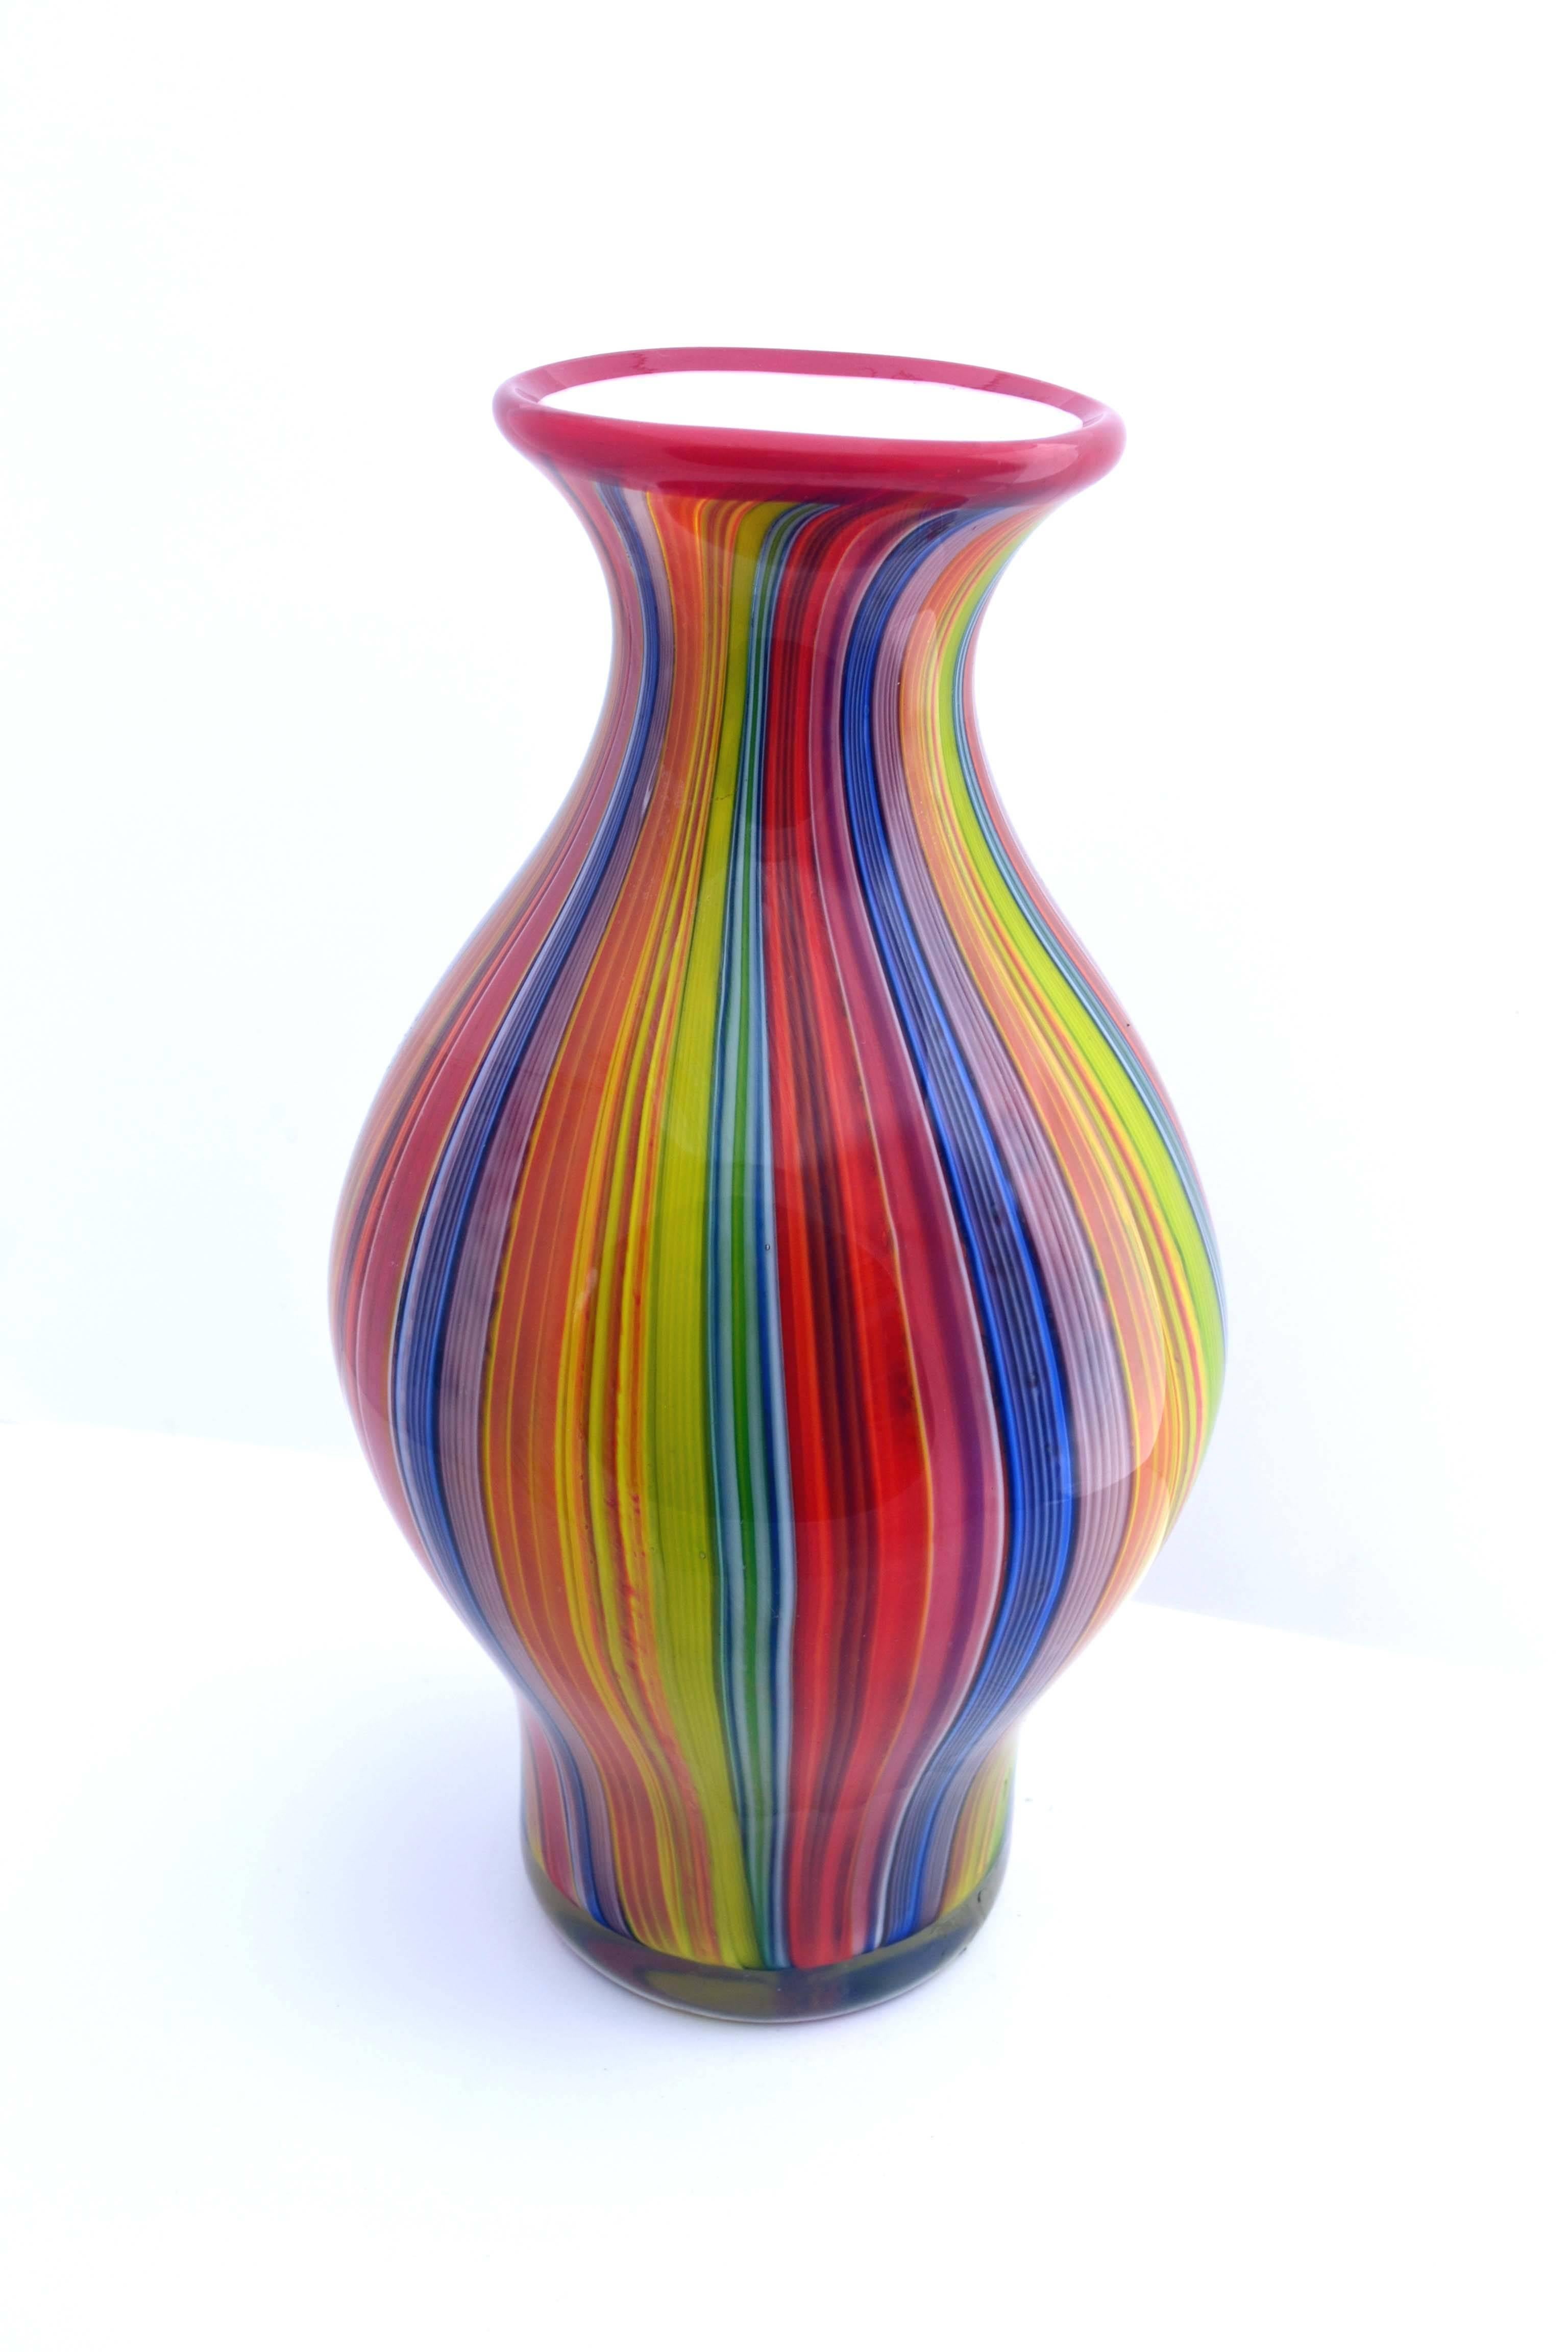 Lively and chic, this substantial rainbow handblown Murano glass vase has a very Mid-Century Modern feel and would be wonderful in a residential or commercial setting, circa 1970. Measures: 13